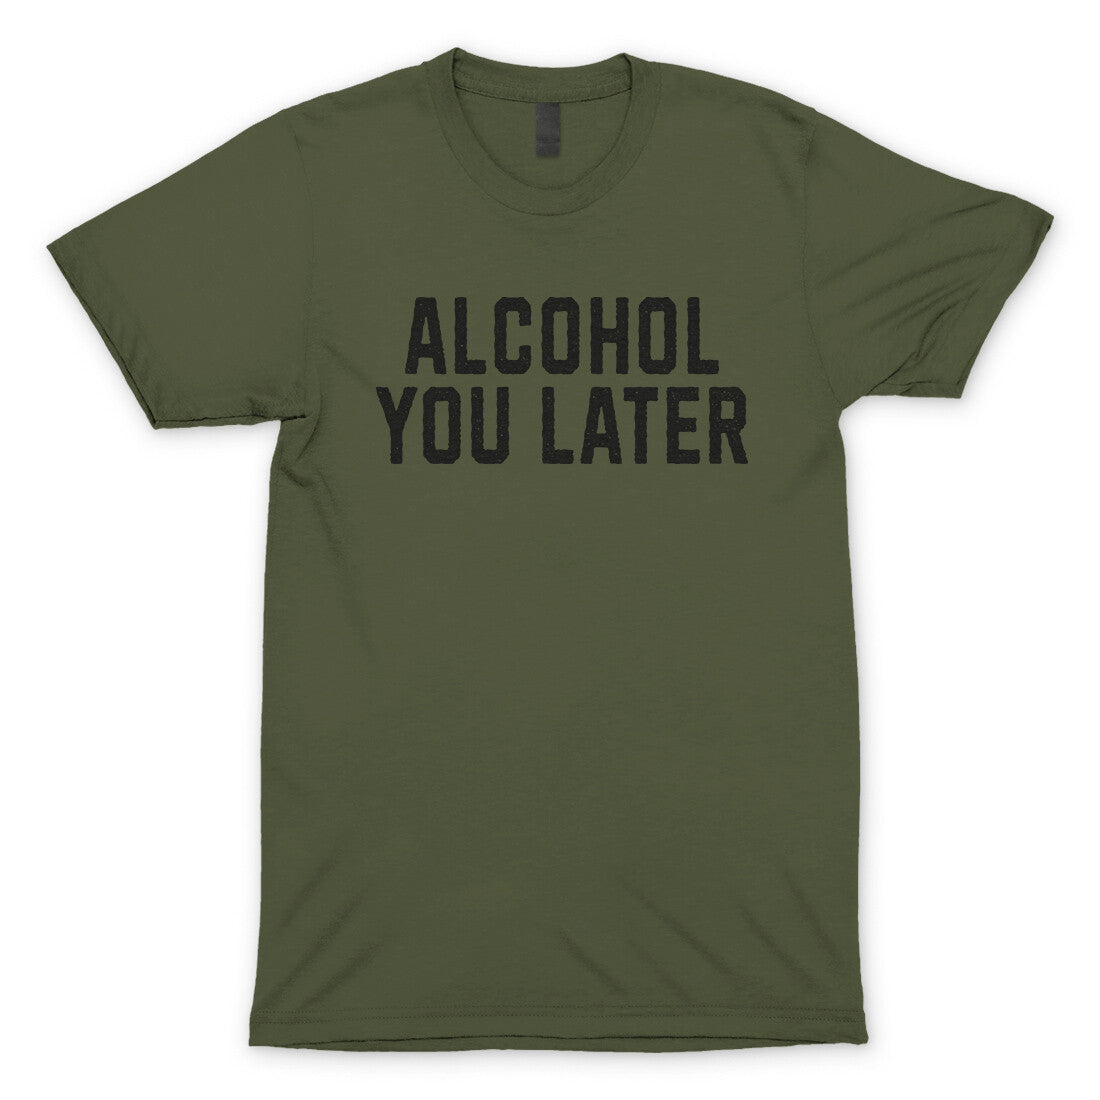 Alcohol You Later in Military Green Color